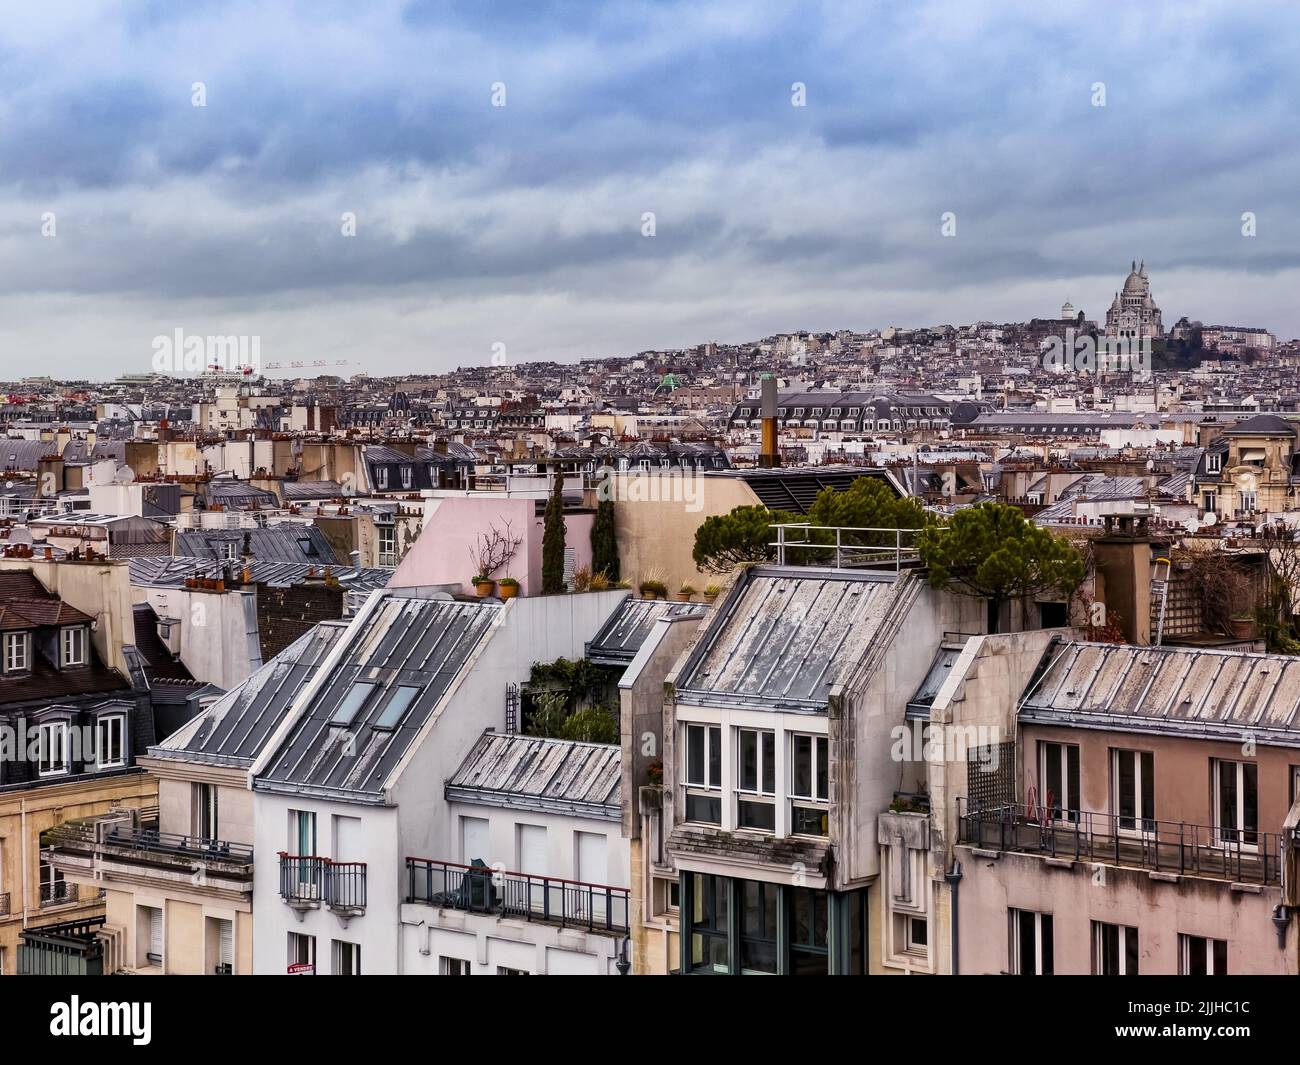 Montmartre Sacre Coeur view in and Paris over downtown buildings Stock Photo